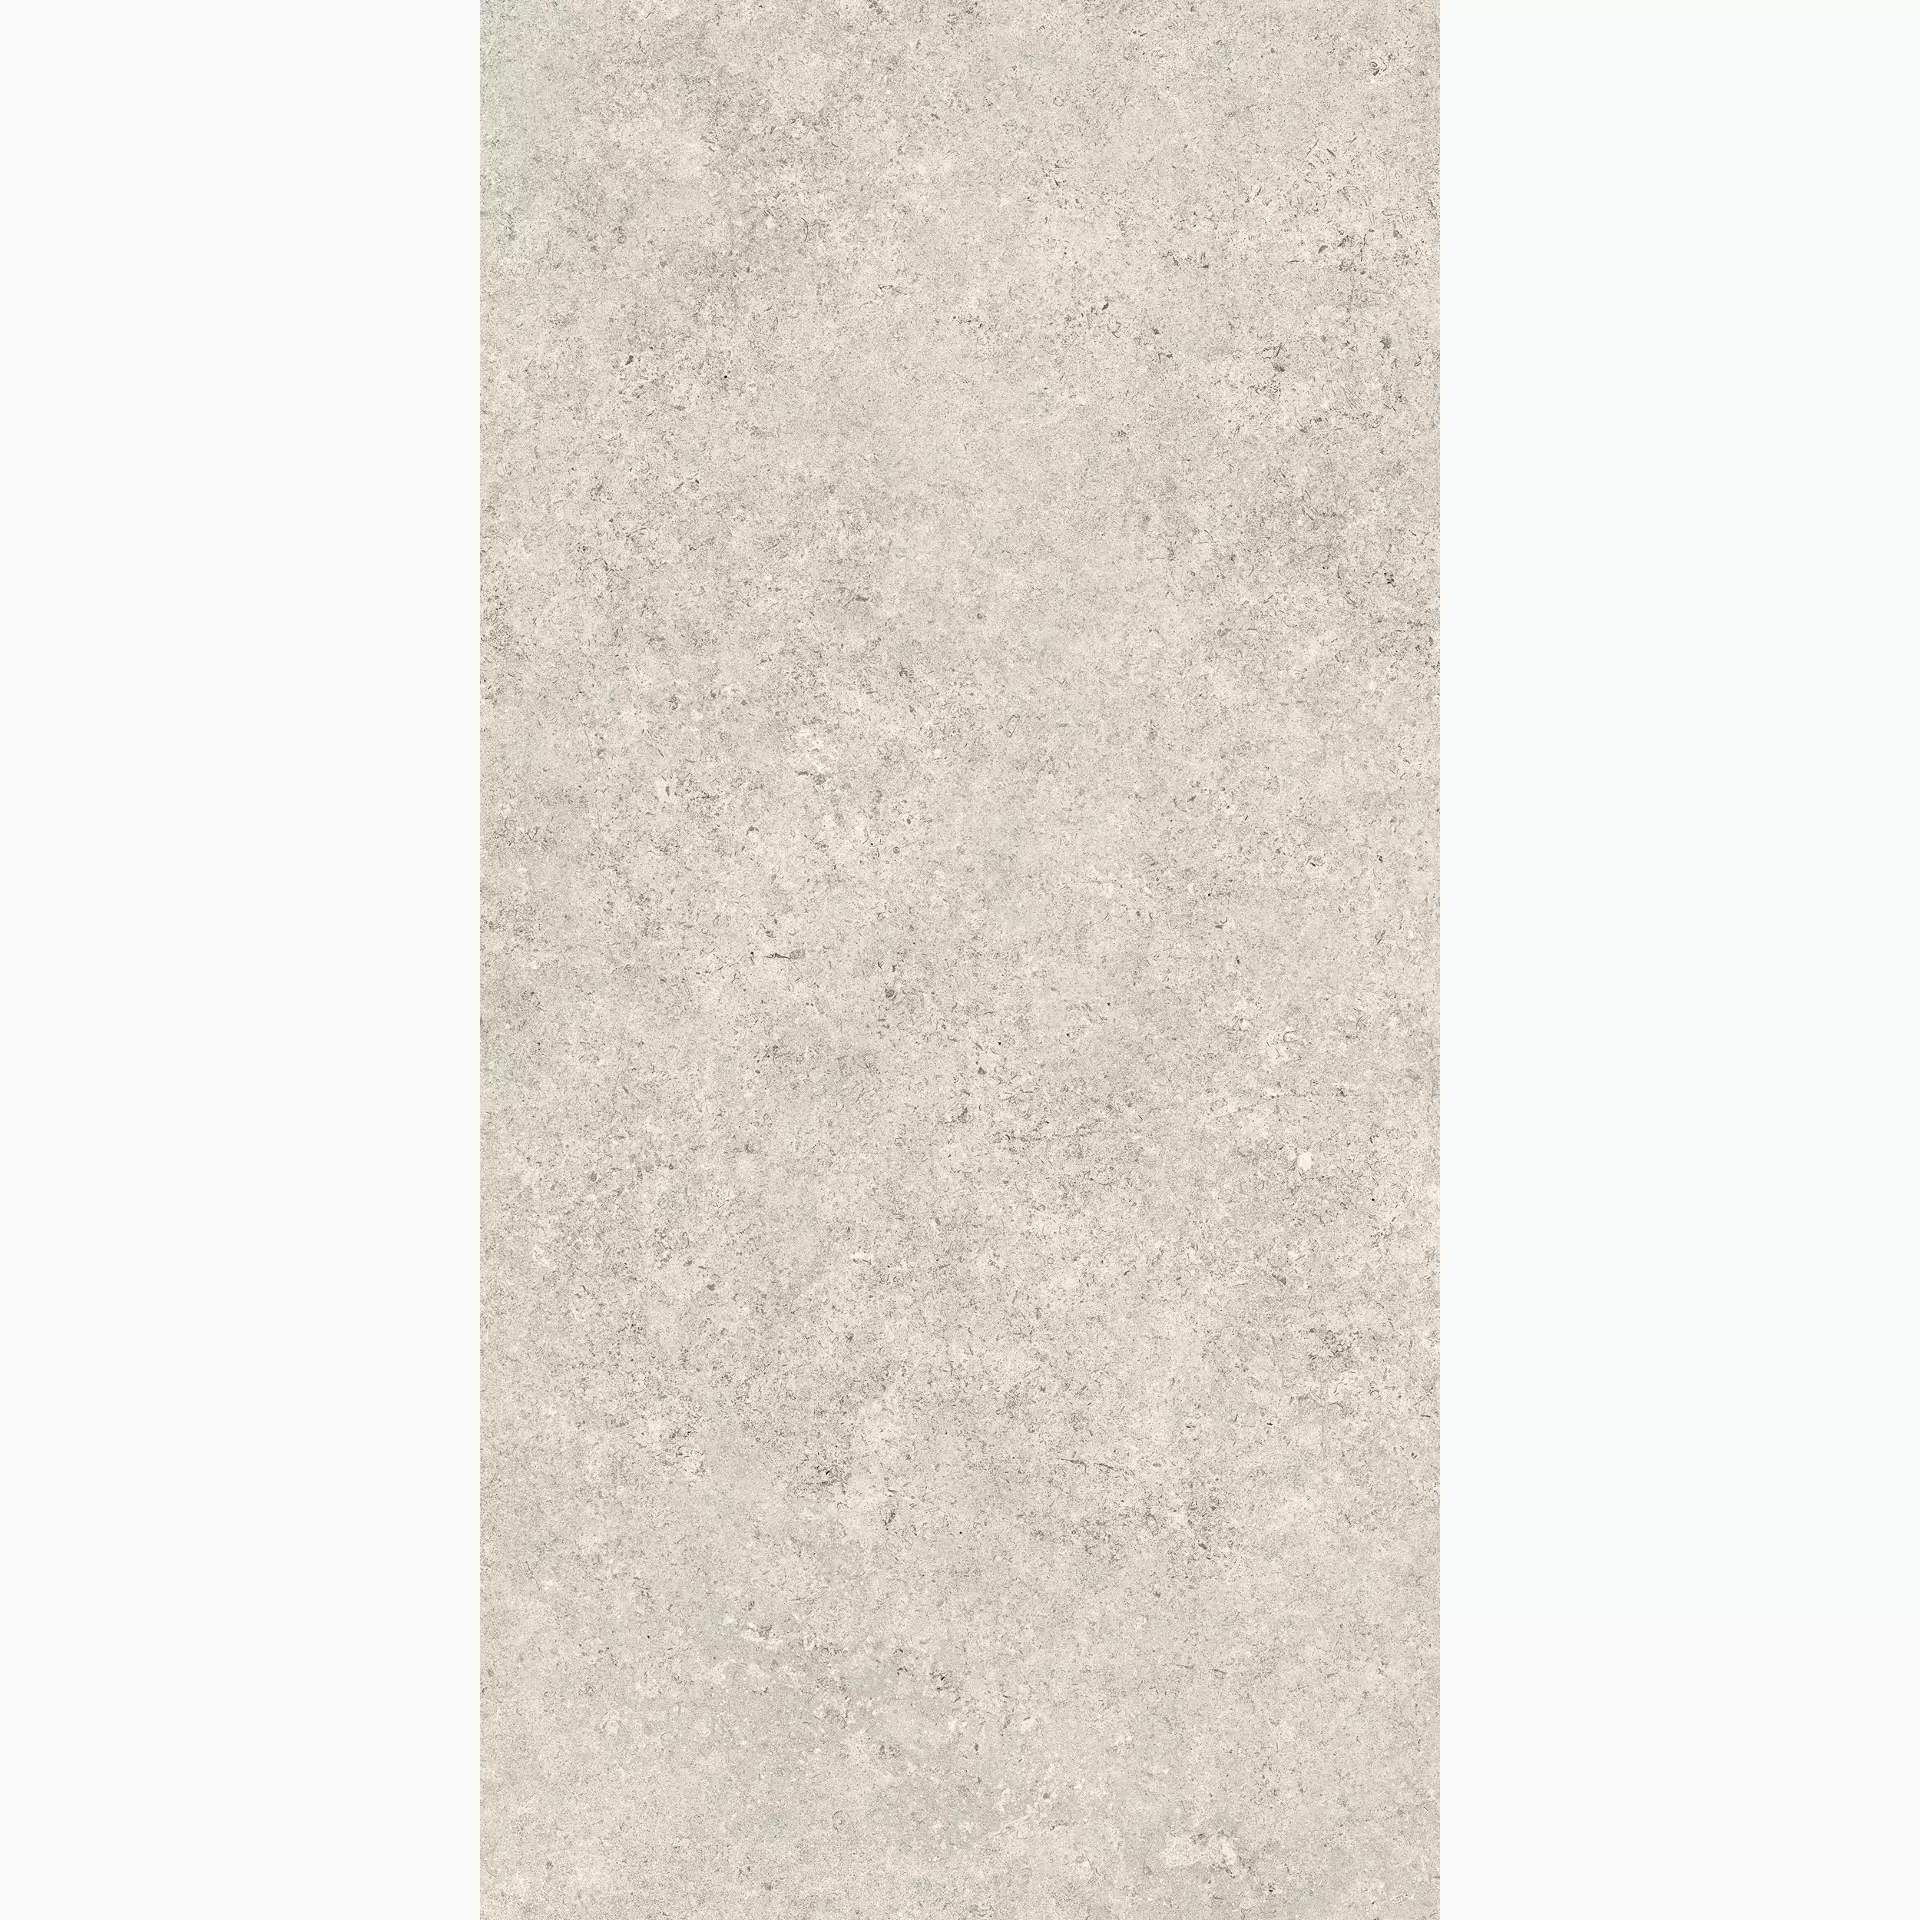 Cottodeste Pura Pearl Honed Protect EG-PRH2 30x60cm rectified 14mm